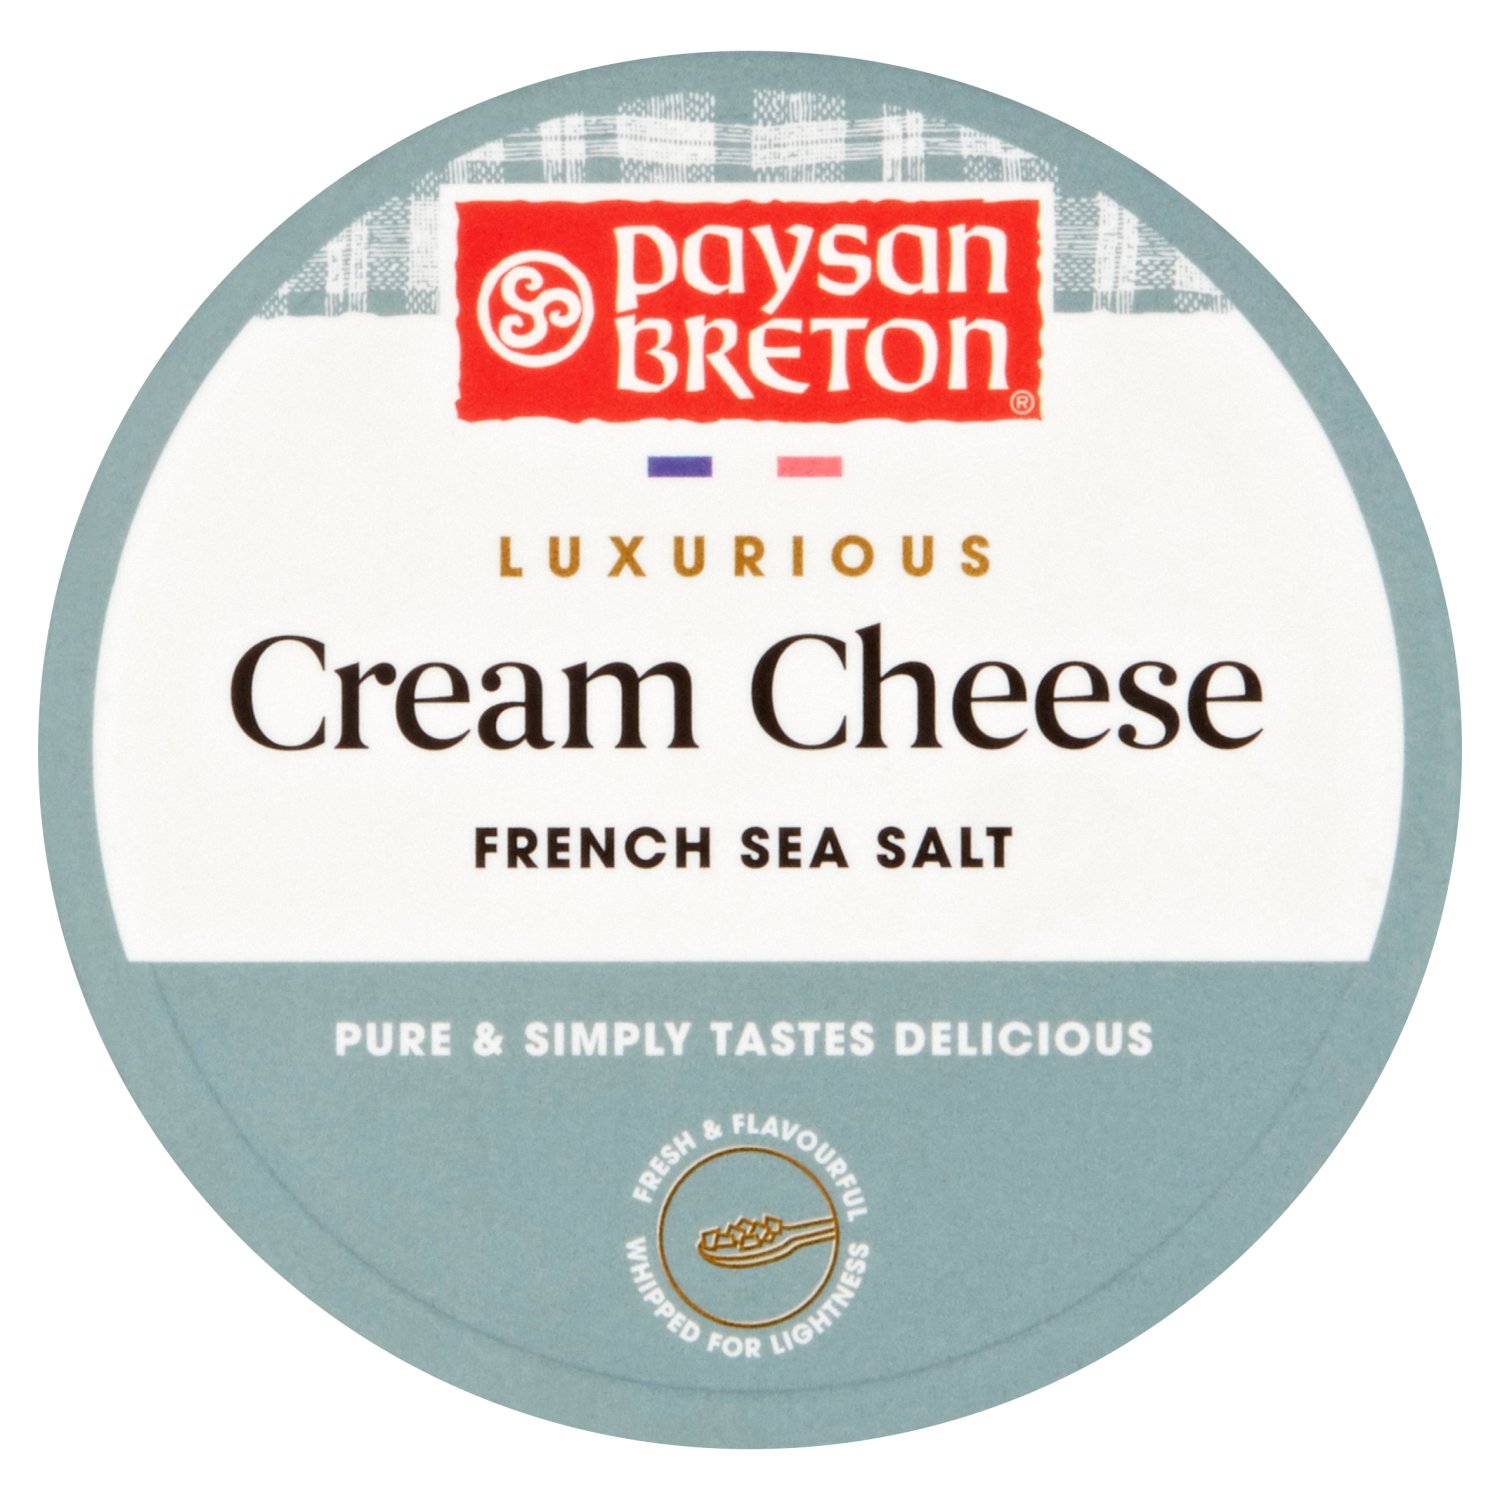 A delicious traditional French whipped cream cheese seasoned with a hint of sea salt from the Guérande estuary in France.

Whipped for a light and airy texture making it easy to spread or dip.

The defining ingredient - Cream Cheese with great cheese taste, endorsed by the Craft Guild of Chefs.